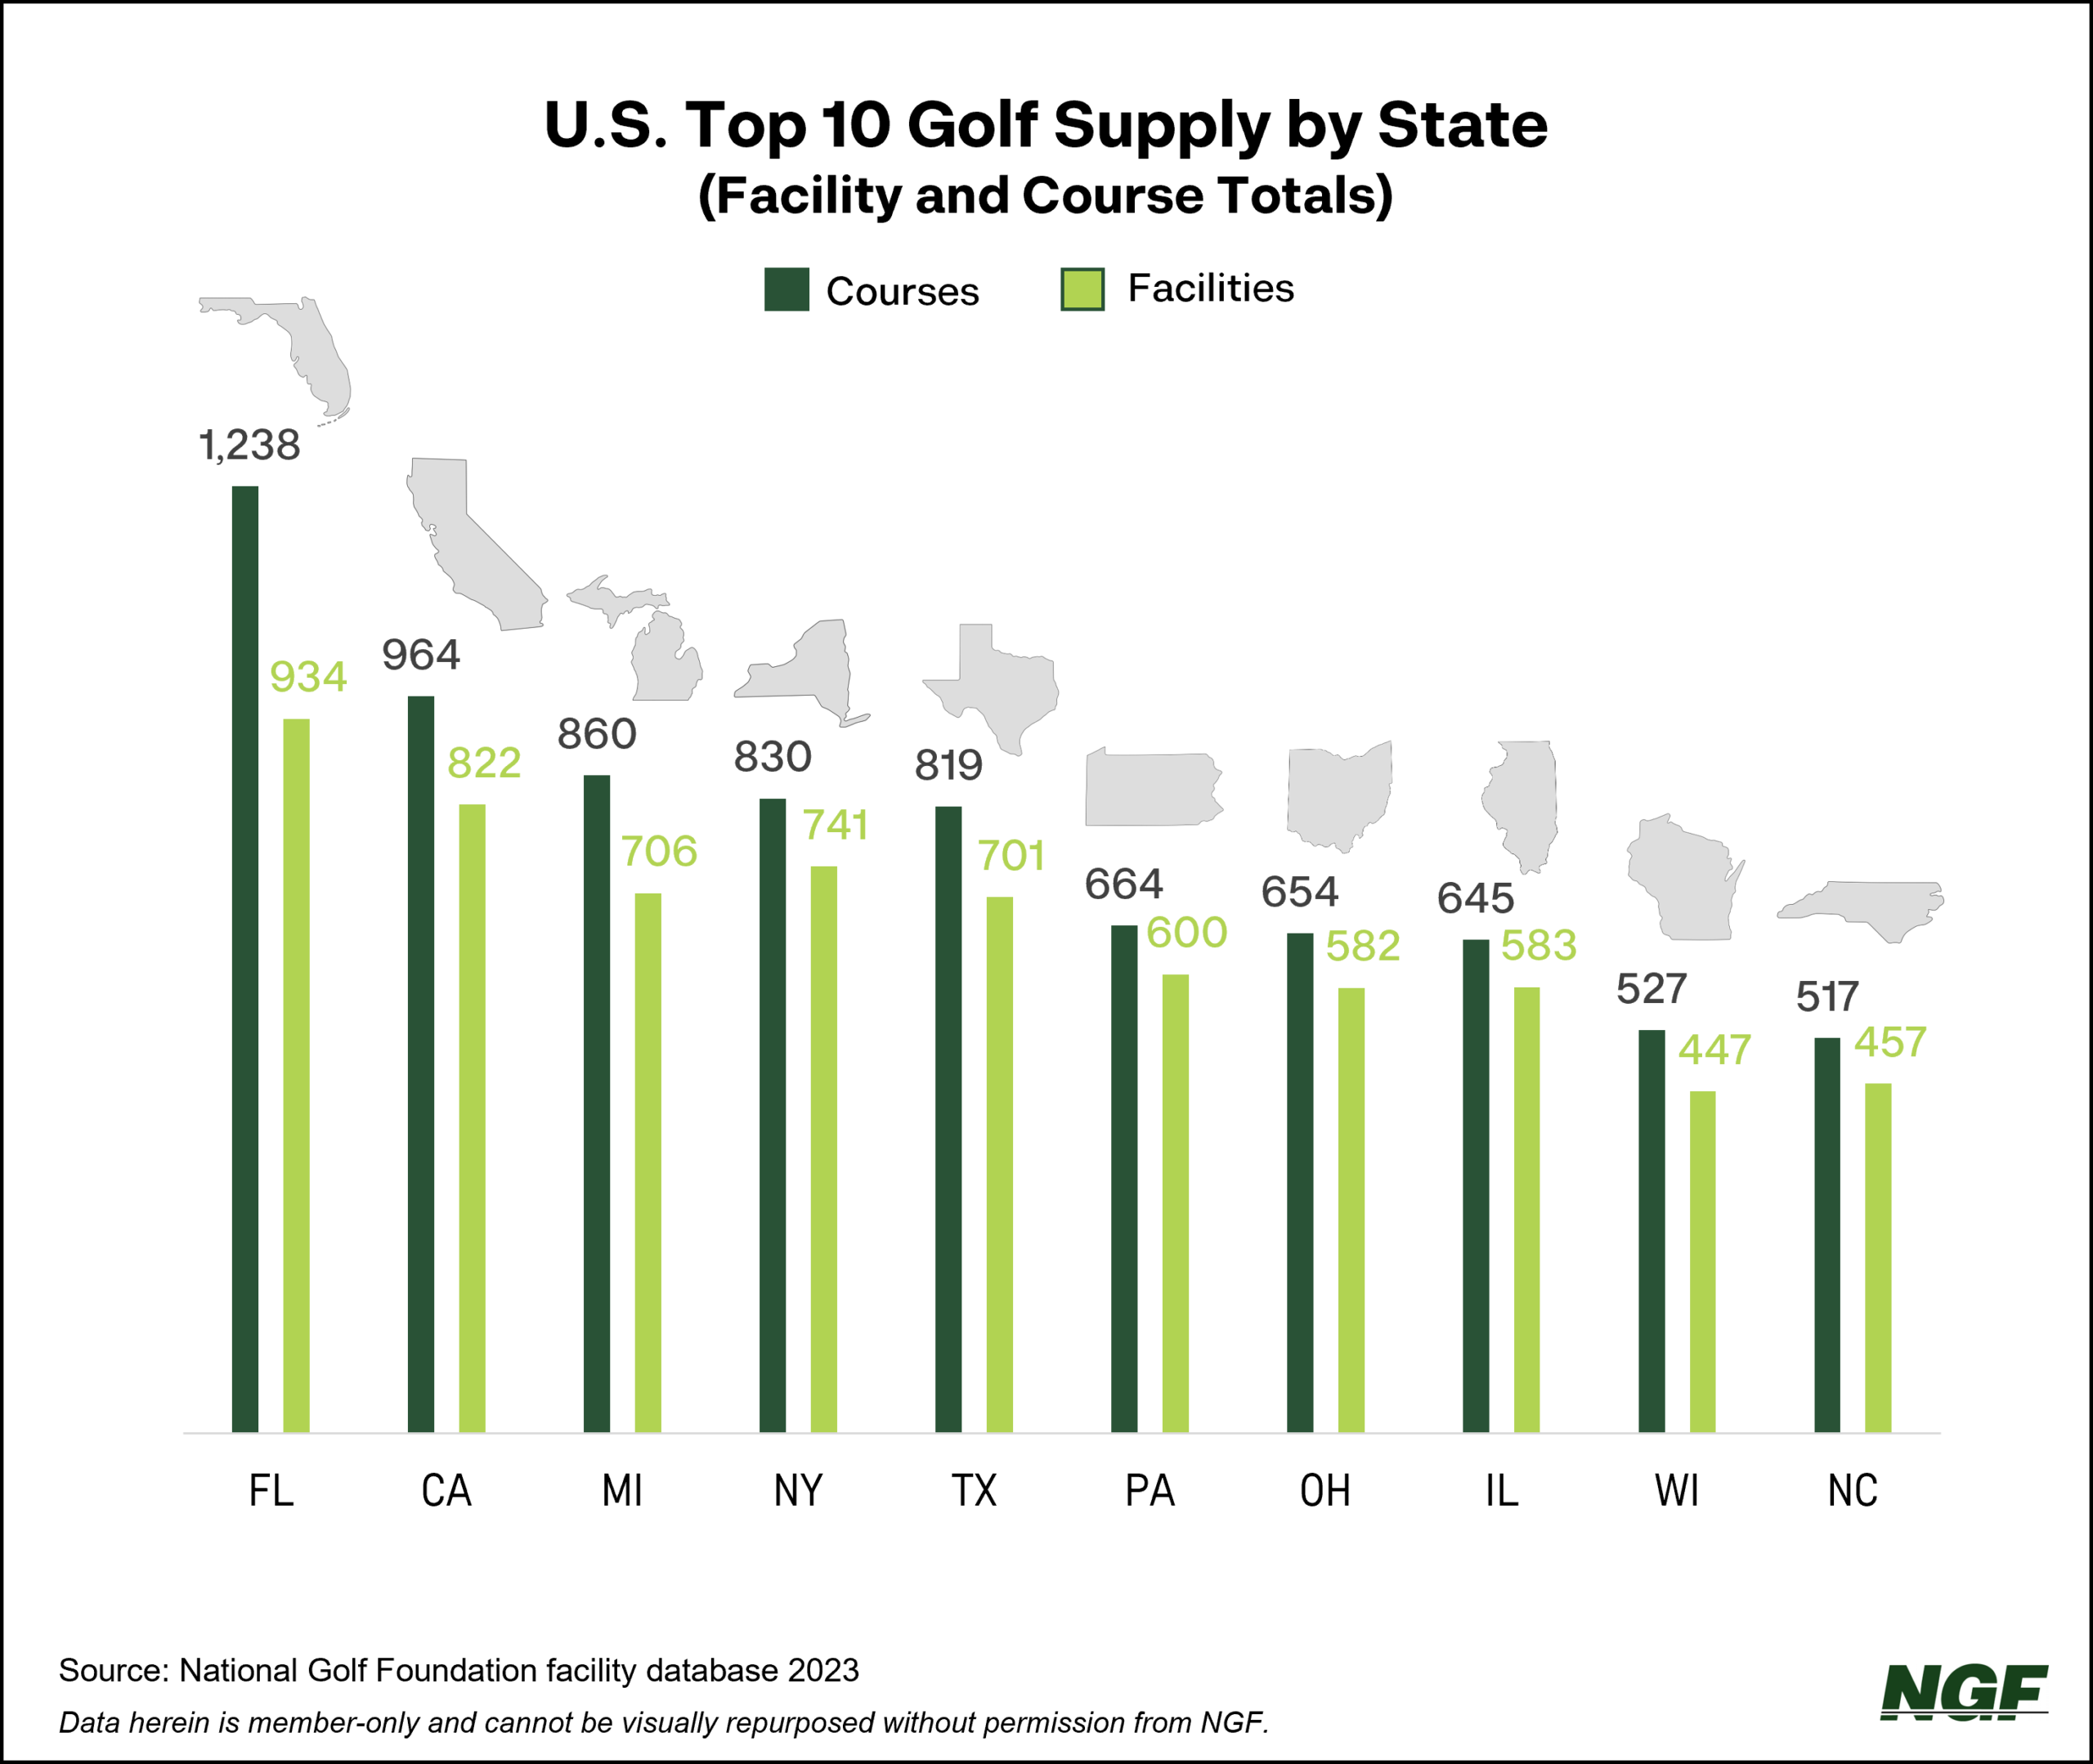 U.S. Course Supply – Top 10 States